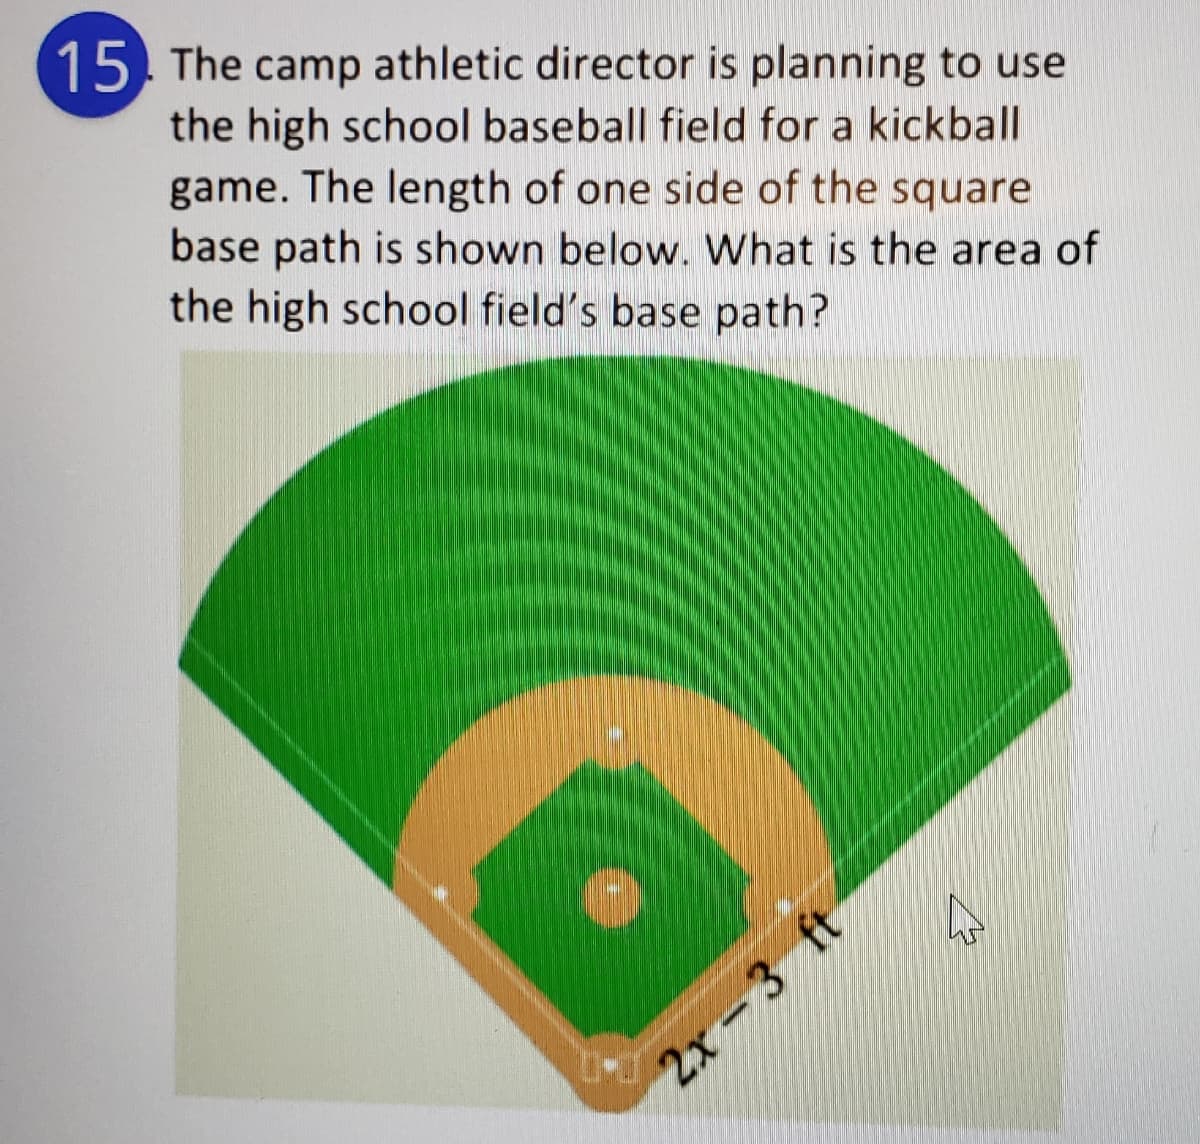 15. The camp athletic director is planning to use
the high school baseball field for a kickball
game. The length of one side of the square
base path is shown below. What is the area of
the high school field's base path?
2х - 3 ft
